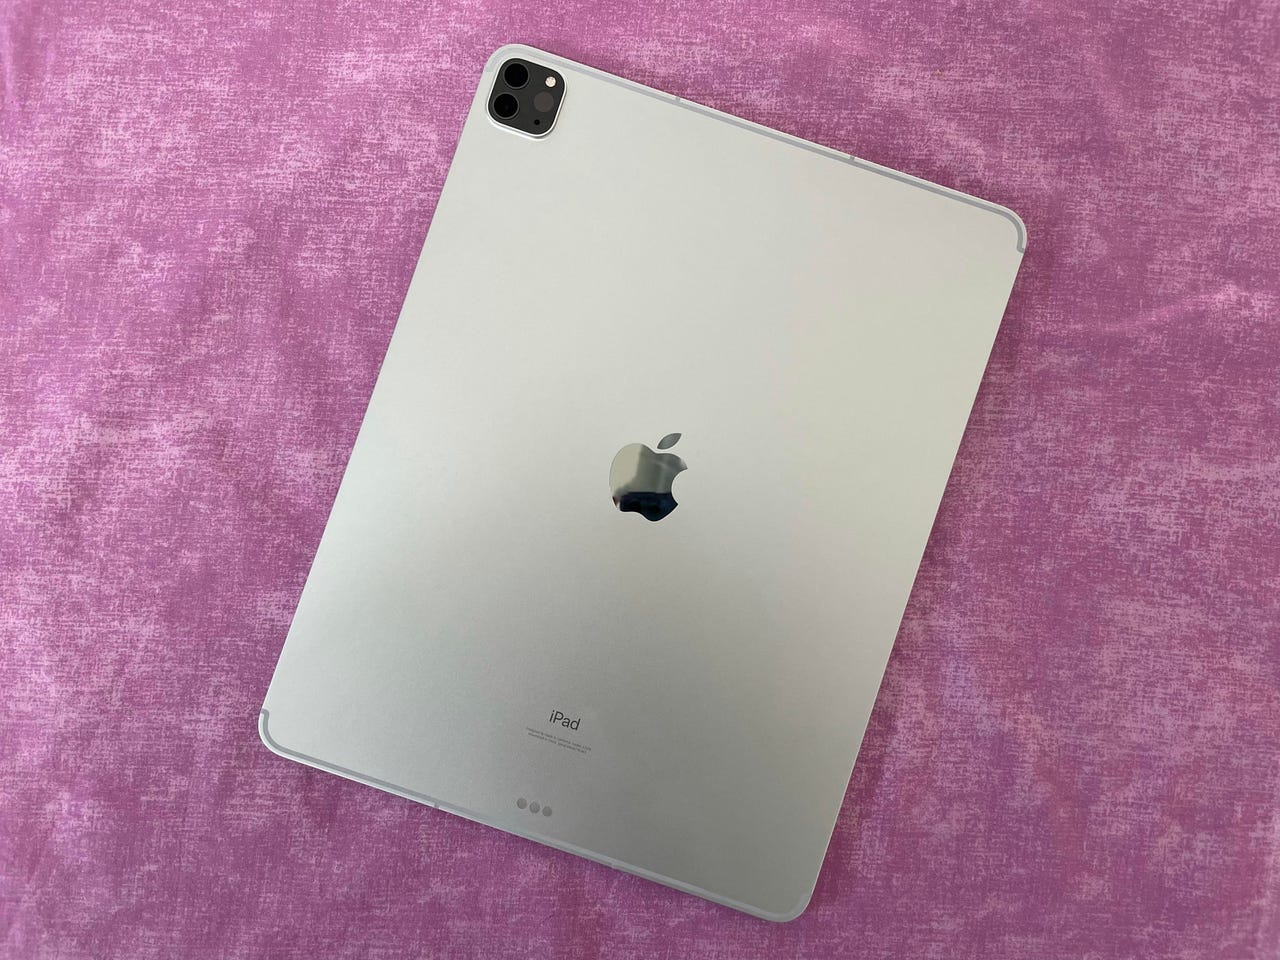 Apple iPad Pro (2021, M1) Review: Overburdened With Power